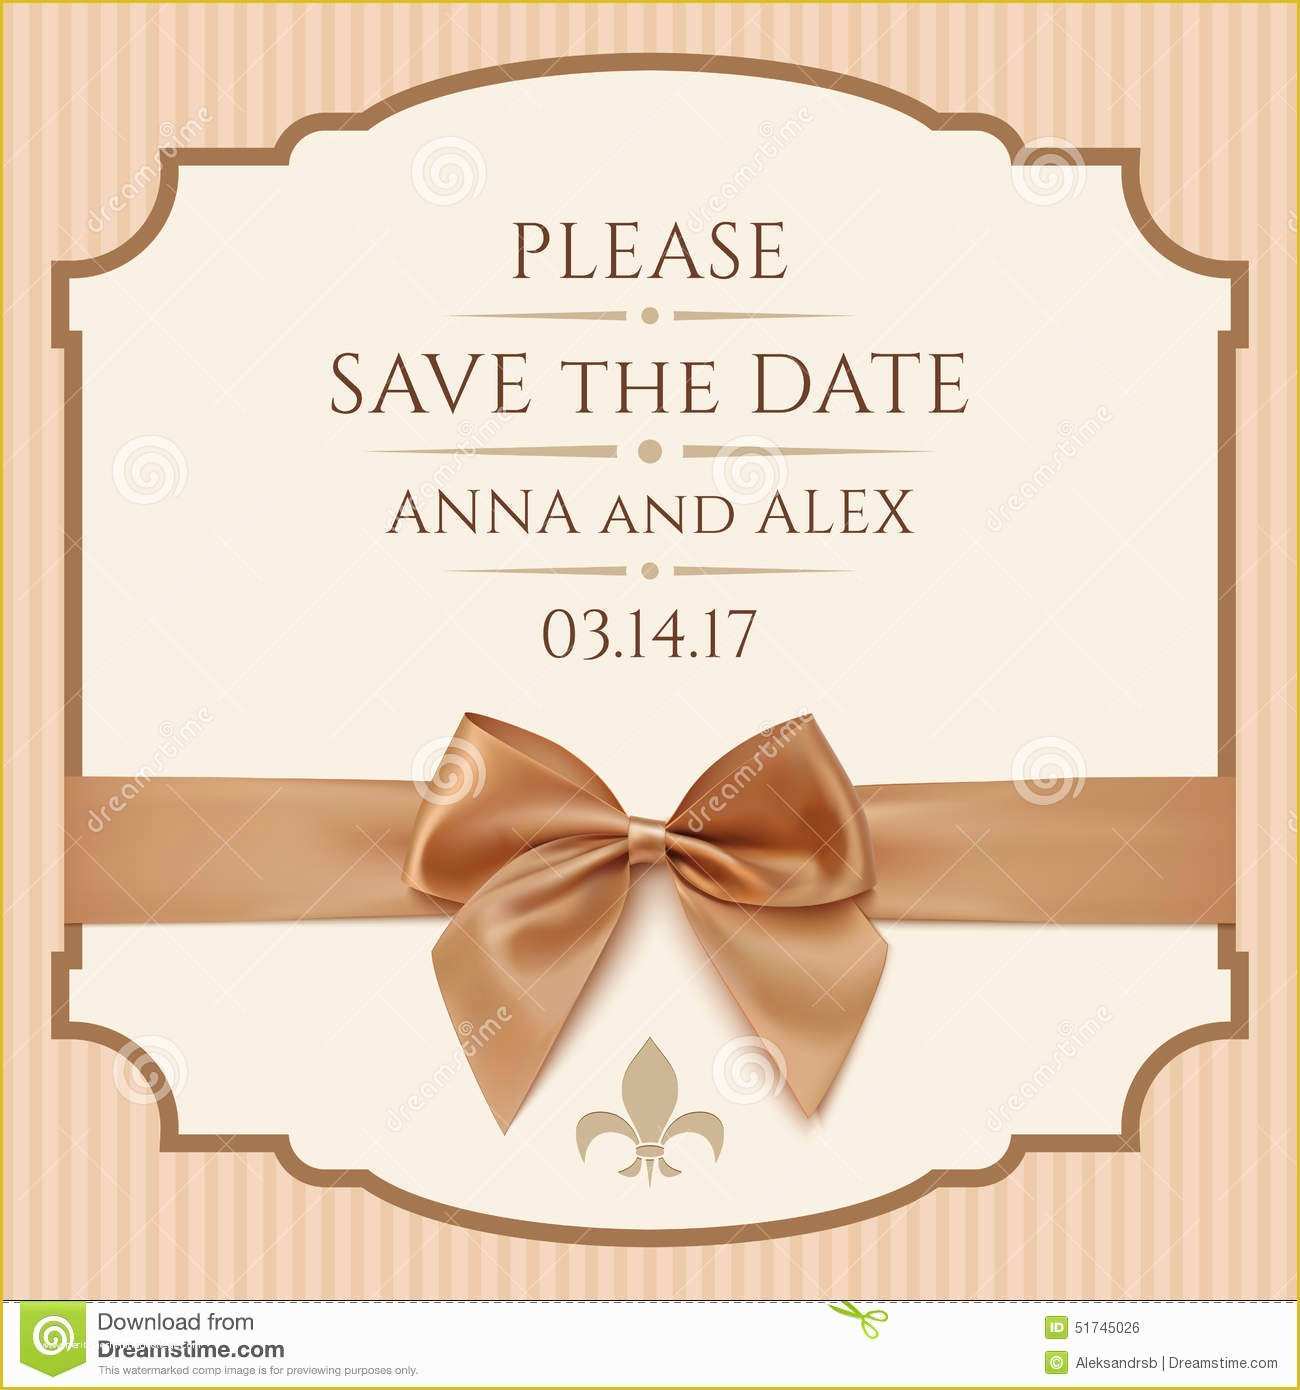 Save the Date Invitation Templates Free Of Date Invitation Template Editable Confetti Bridal Shower